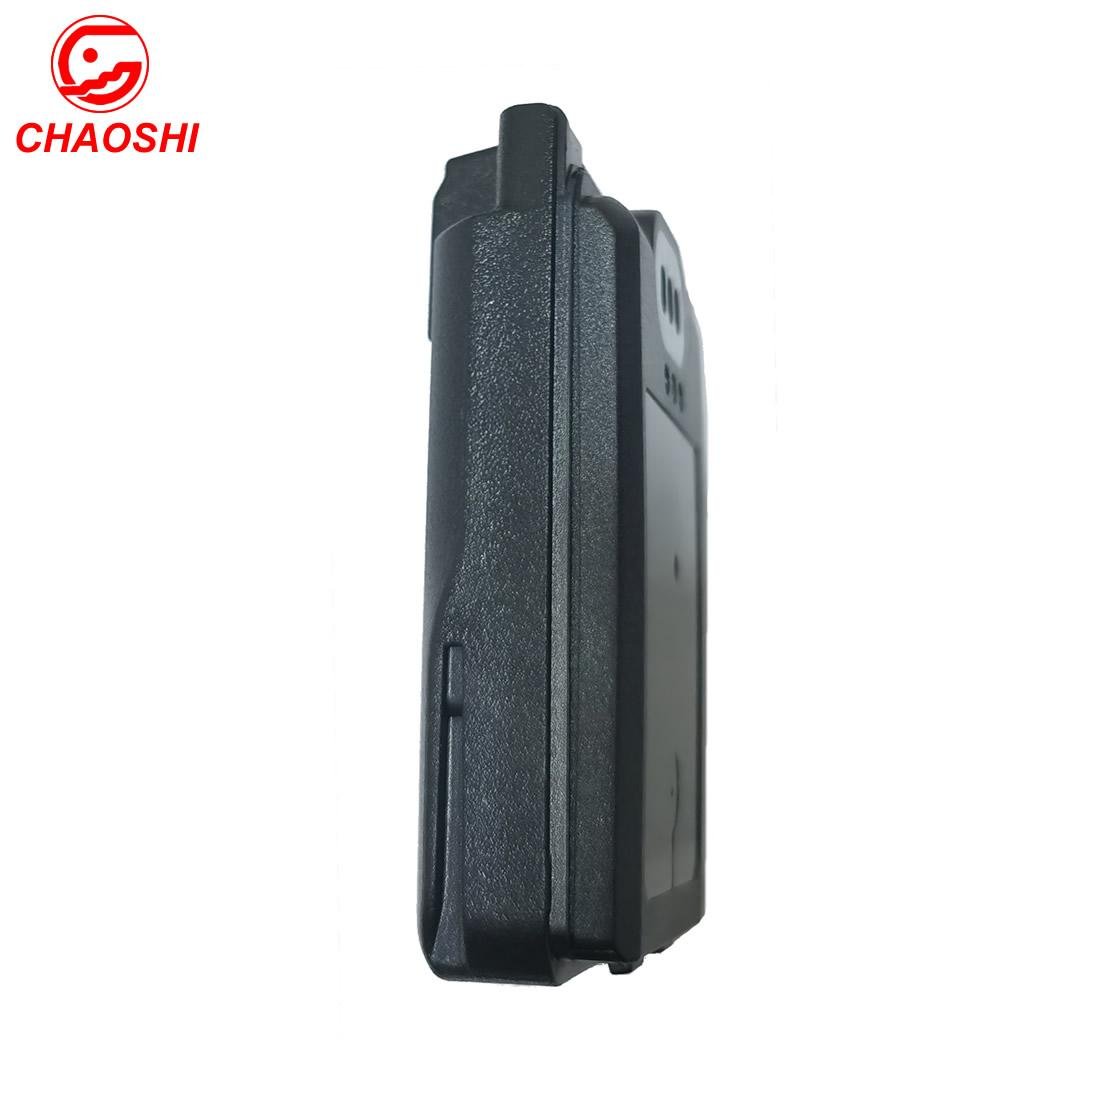 BP290 Battery For walkie talkie IC-F52D, IC-F62D, IC-M85 5